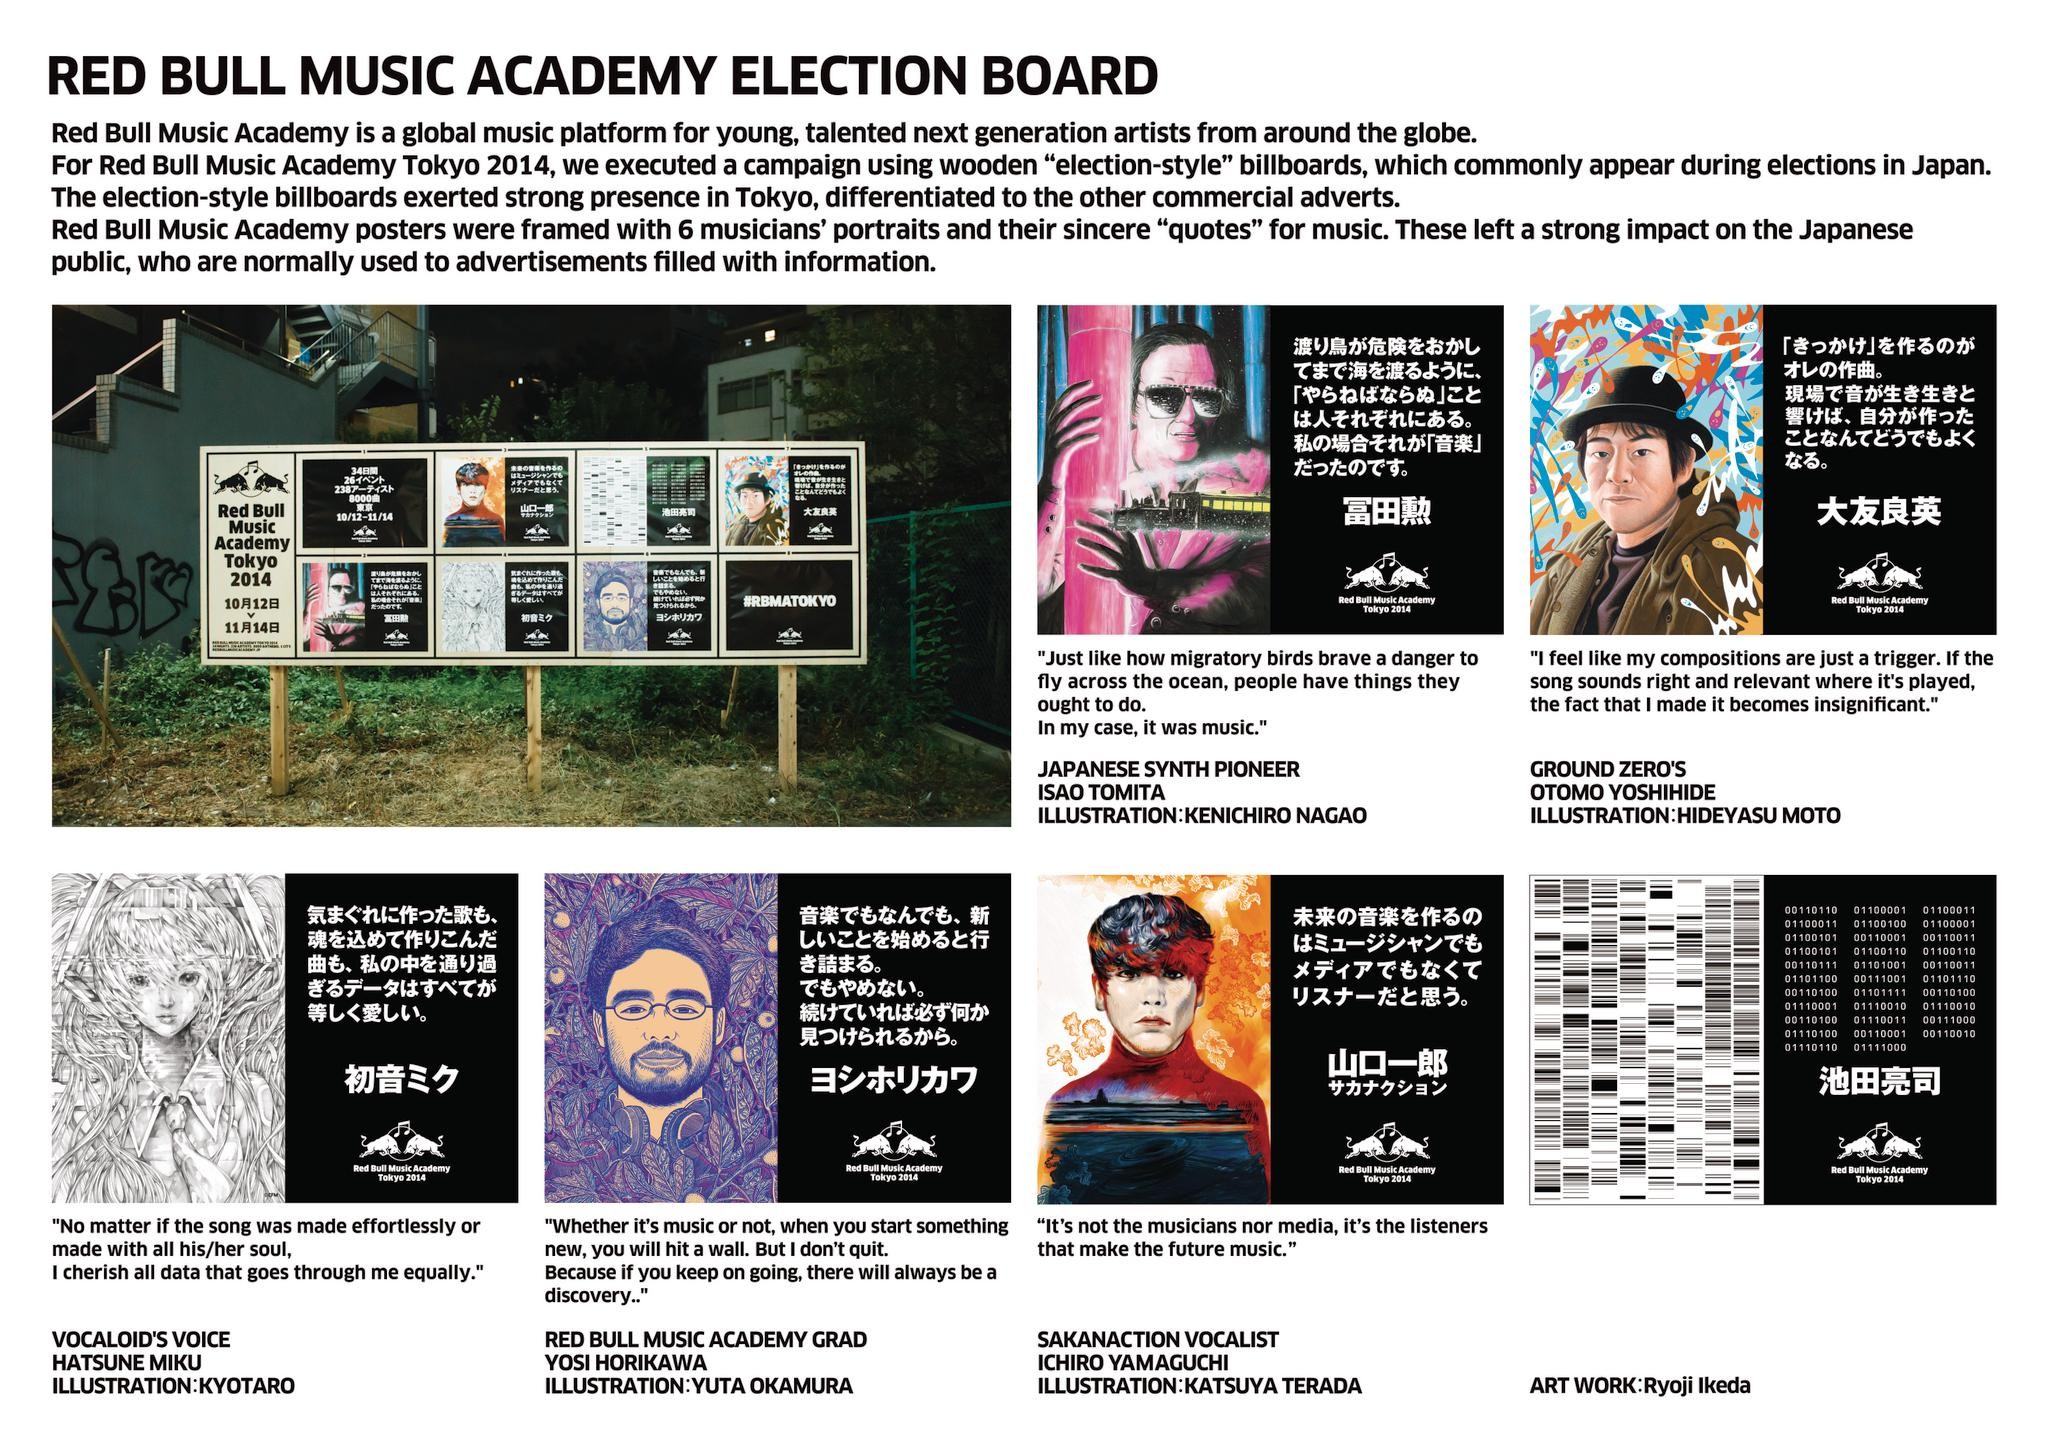 RED BULL MUSIC ACADEMY ELECTION BOARD